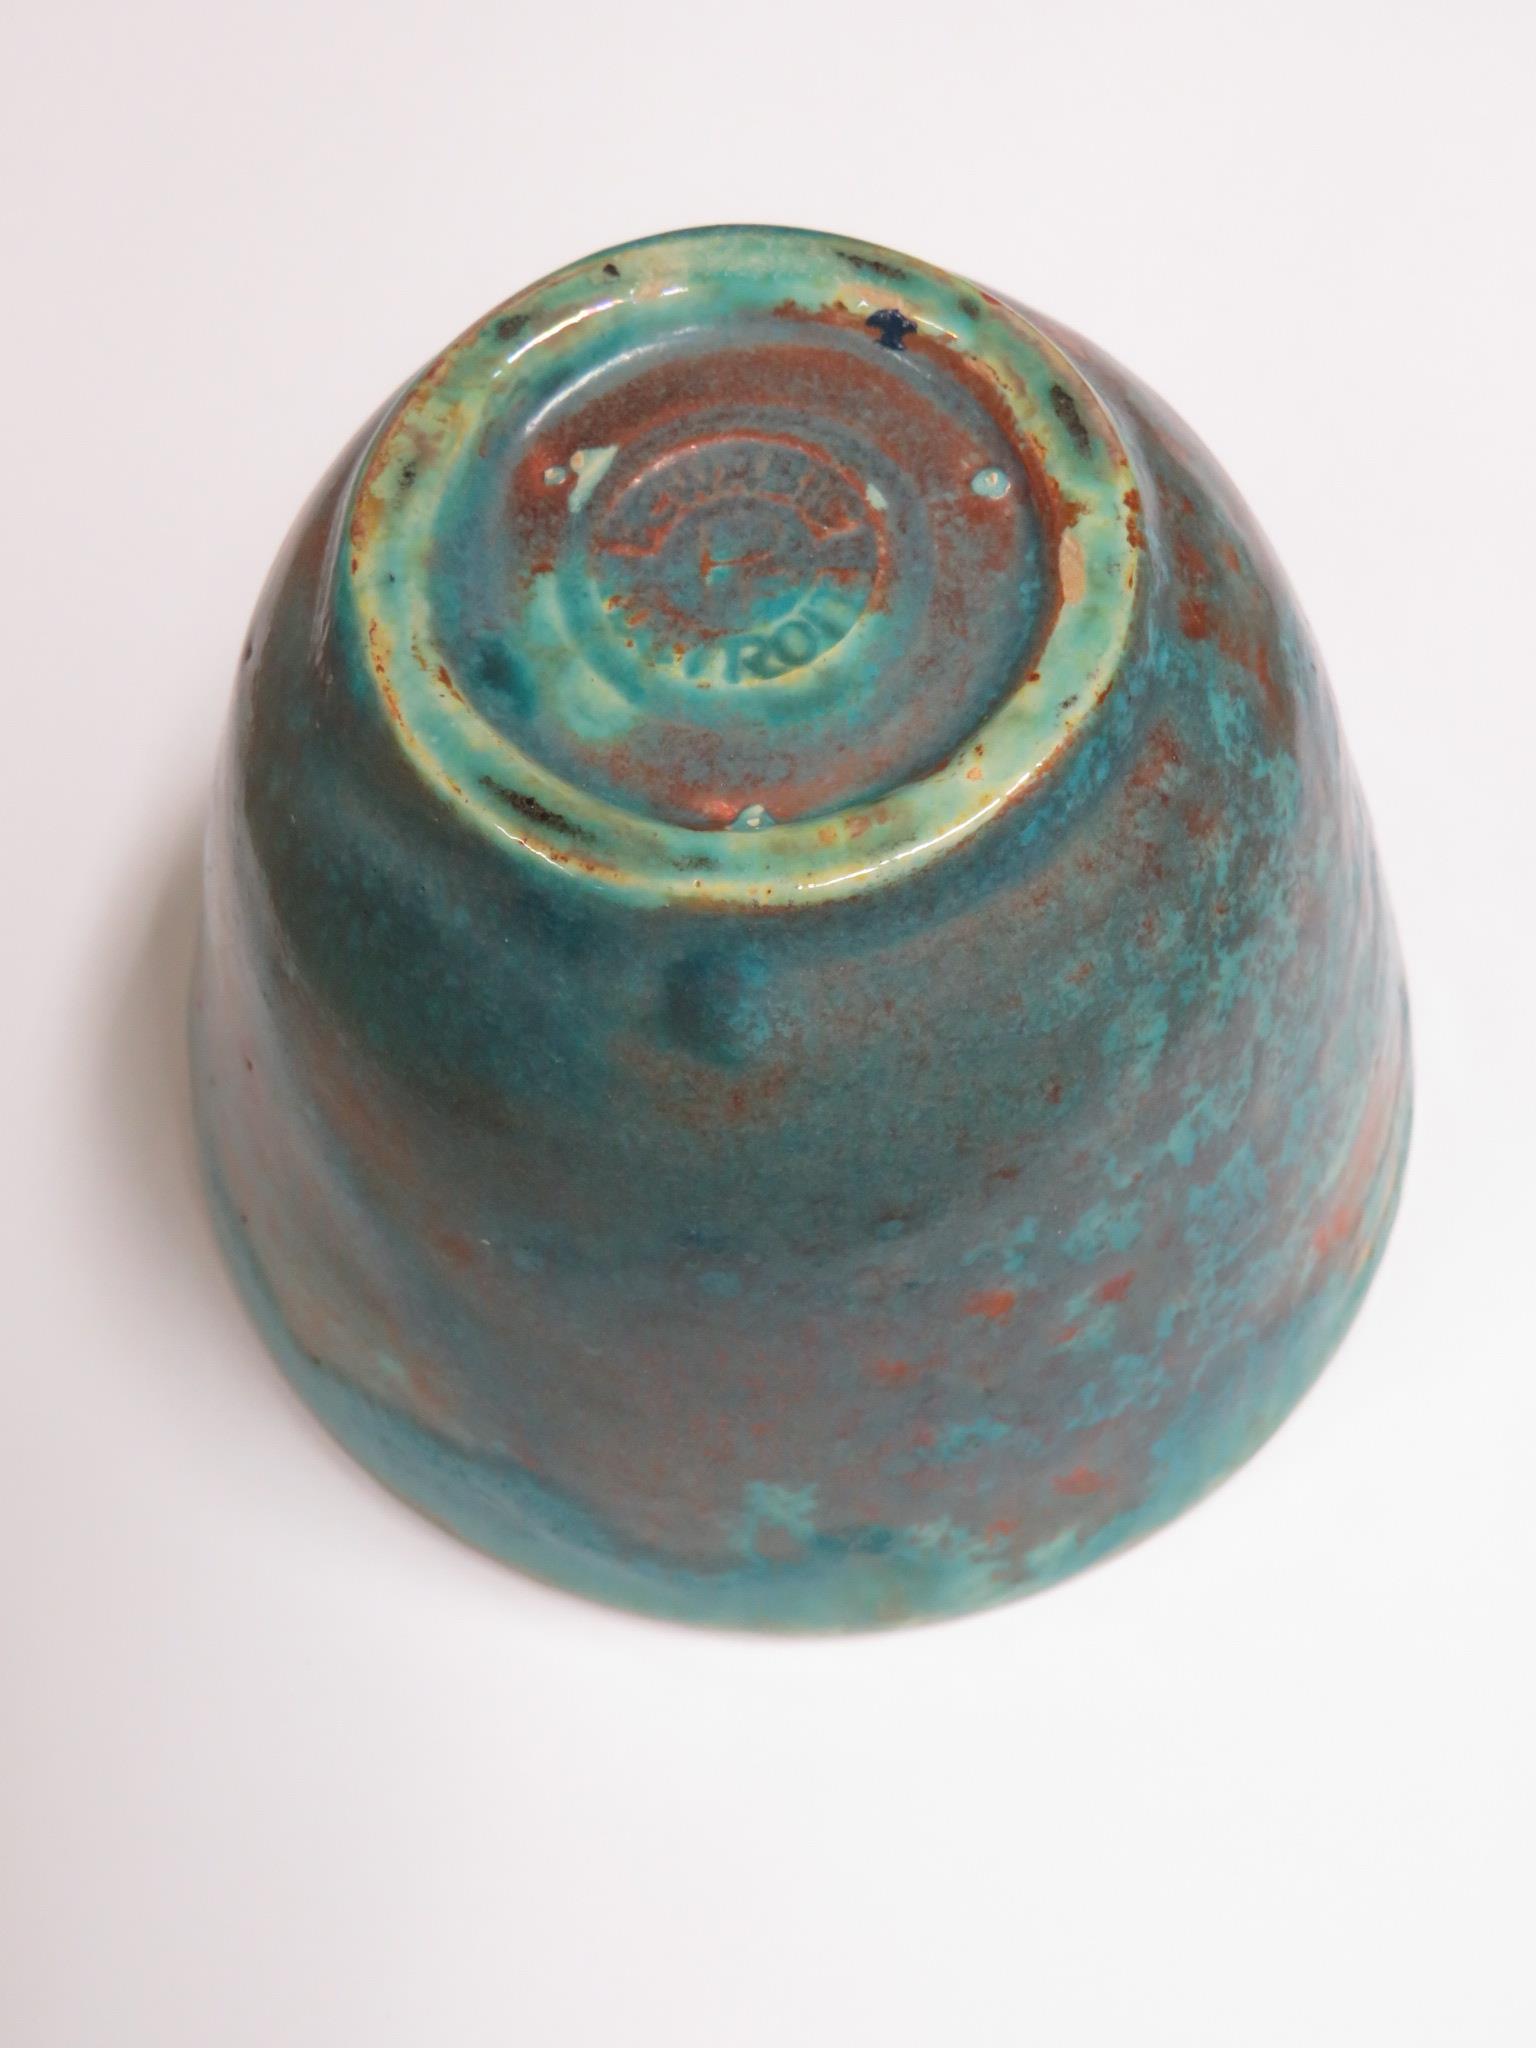 POTTERY CUP IN GREEN AND BROWN METALLIC GLAZE, HEIGHT 7.8CM, THE BASE STAMPED PEWABIC DETROIT WITH - Image 3 of 4